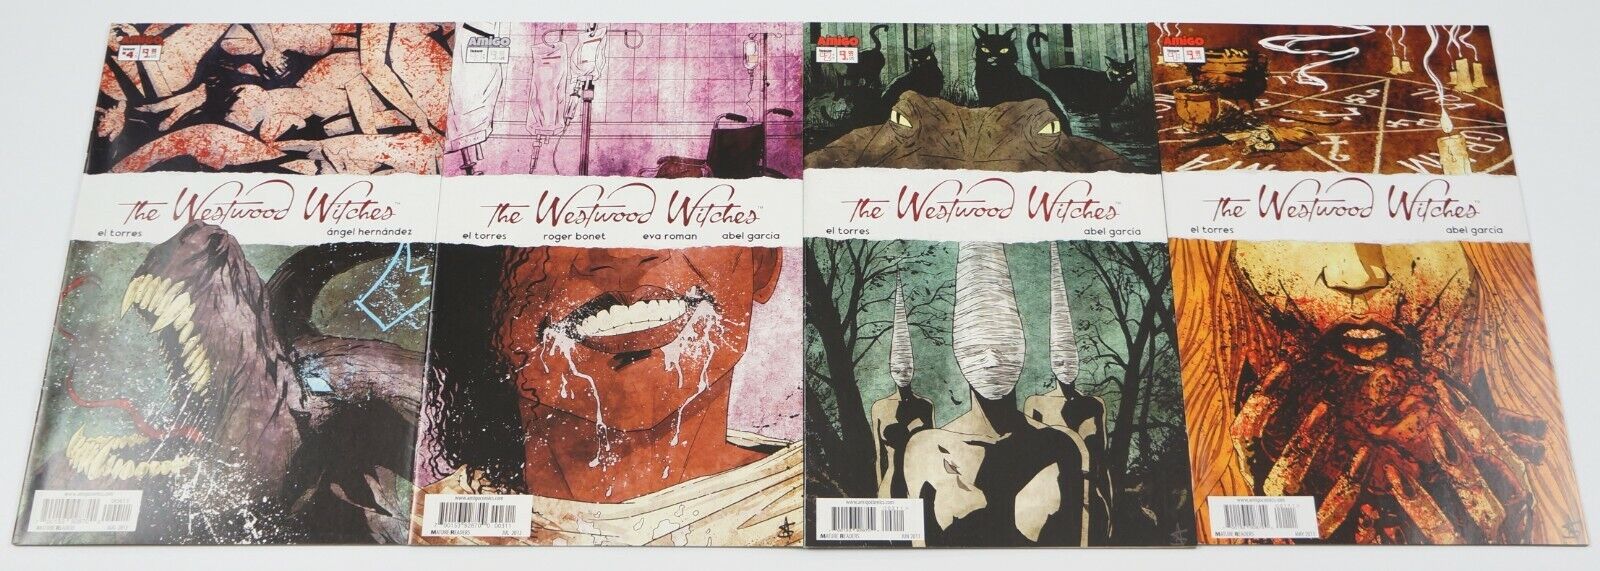 the Westwood Witches #1-4 VF/NM complete series - el torres - abel garcia 2 3 